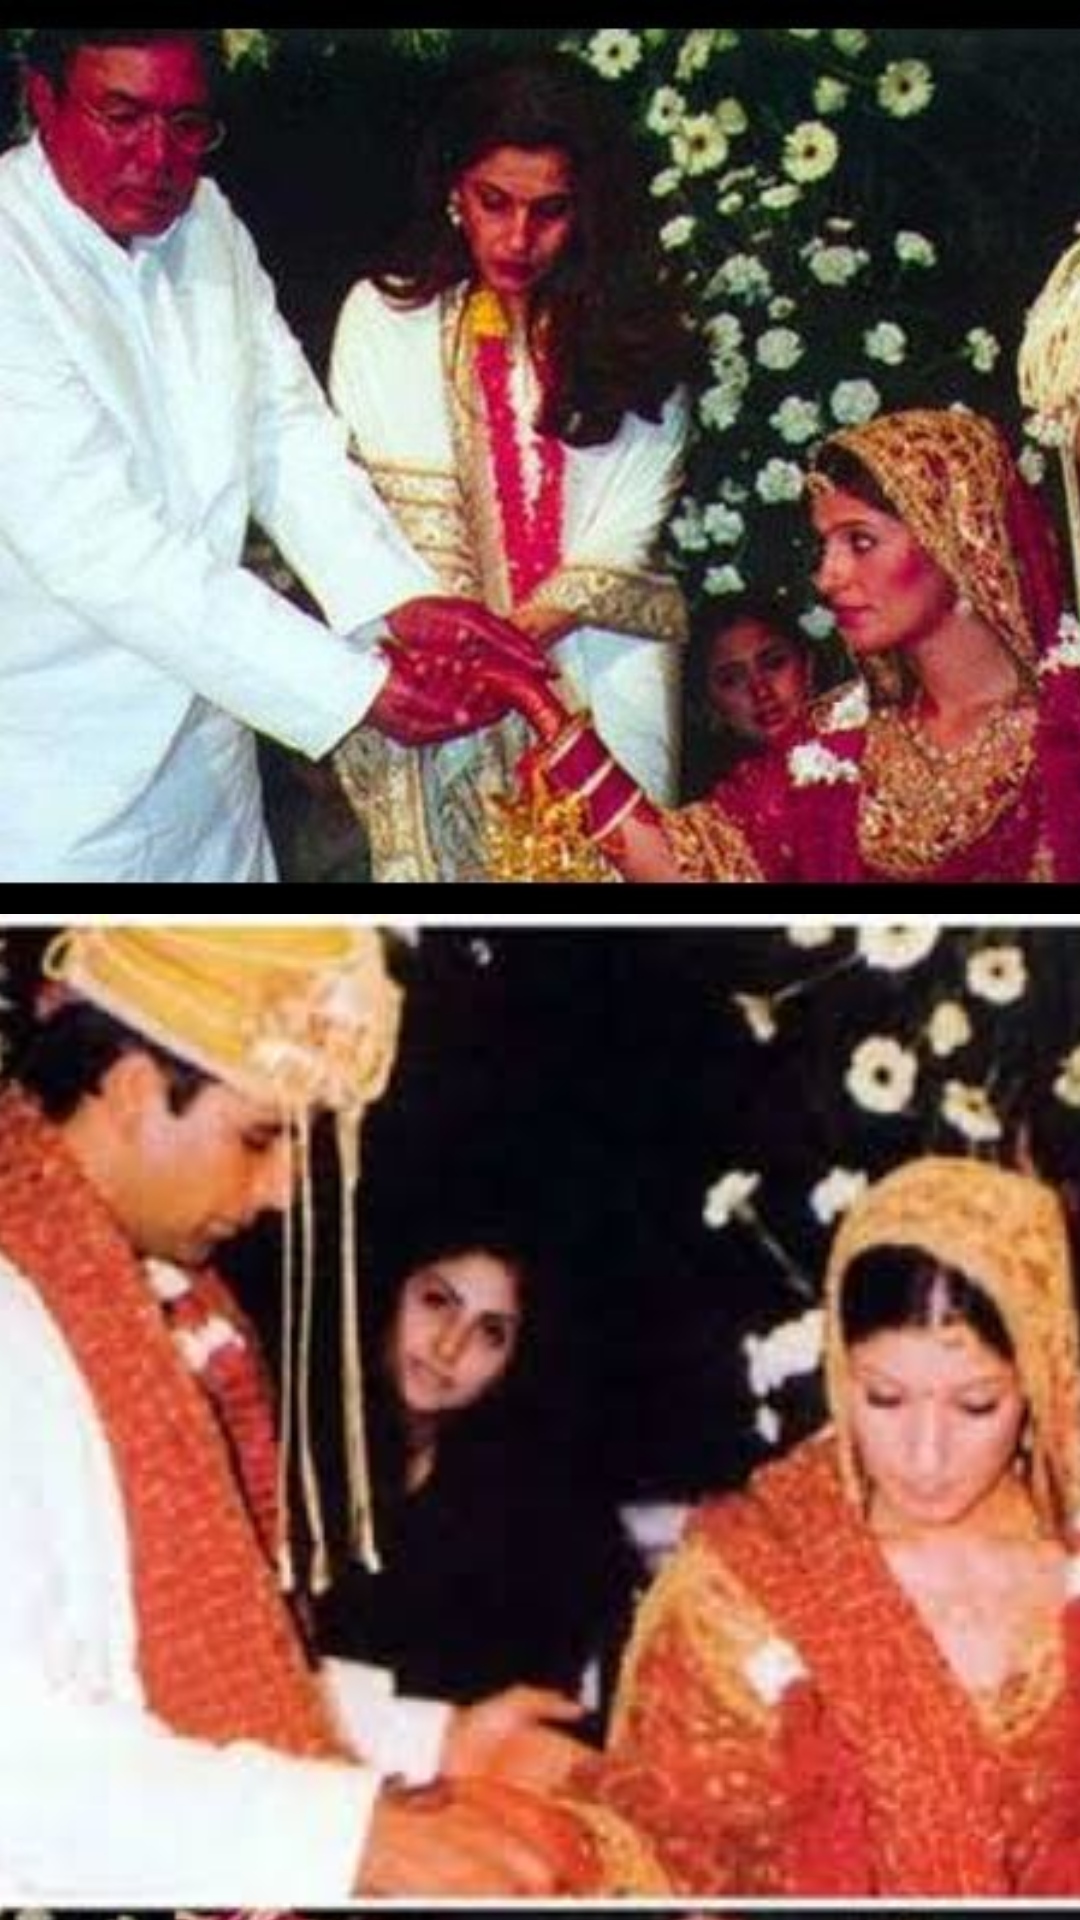 Akshay Kumar and Twinkle Khanna are a popular Bollywood couple who have been married for over two decades.